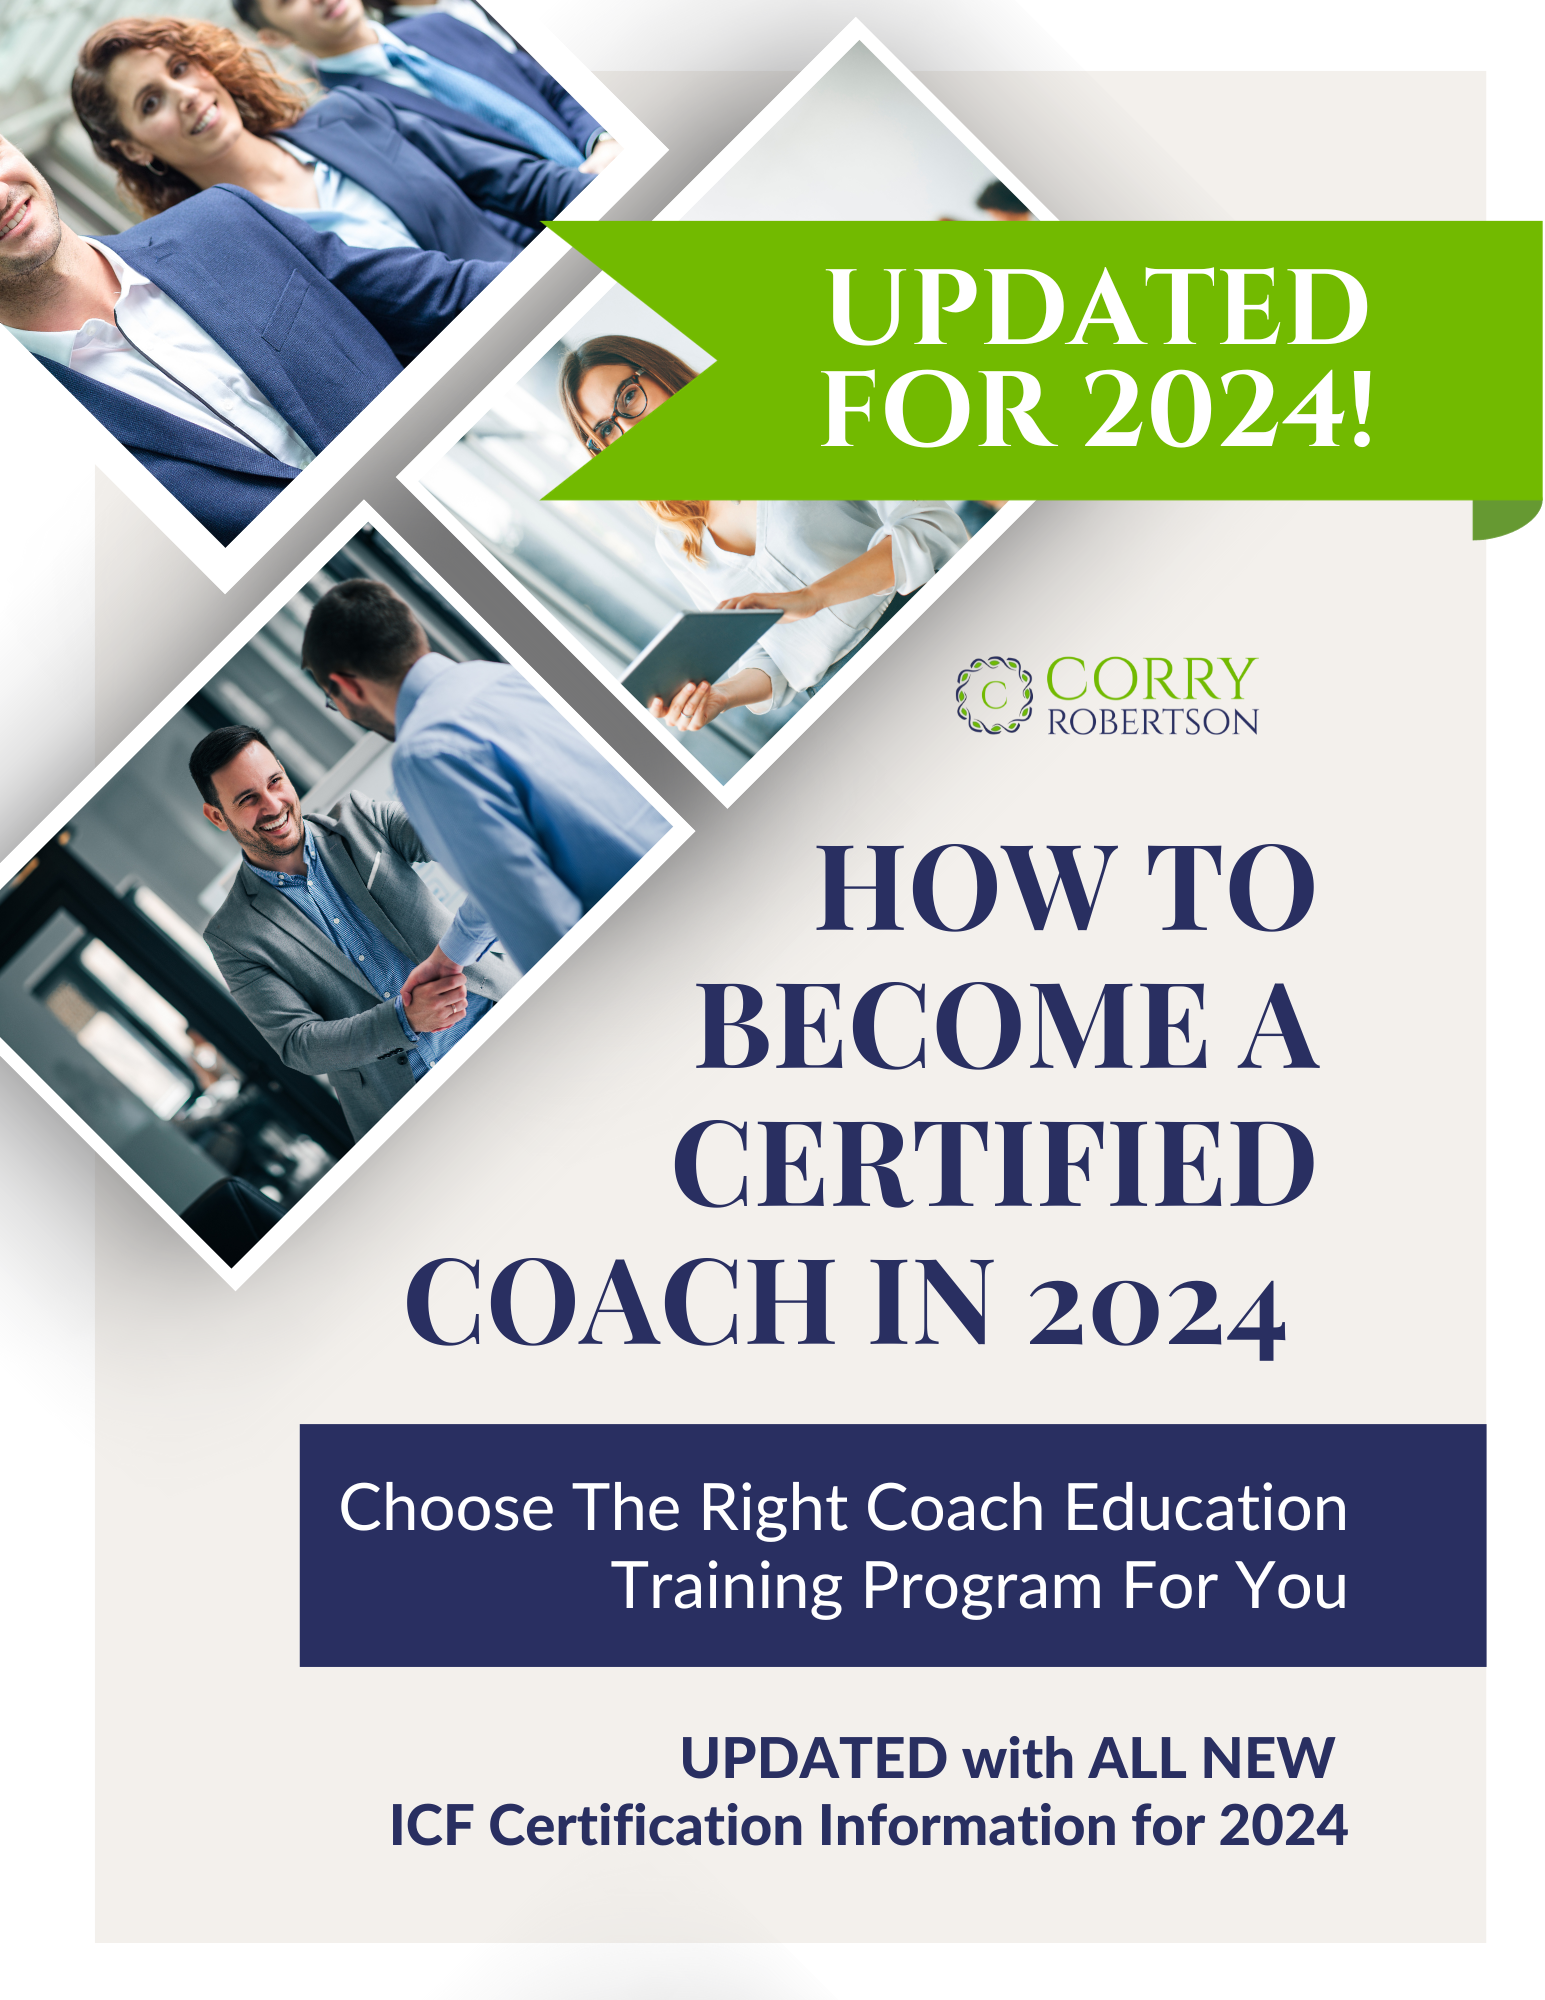 How To Become A Certified Coach